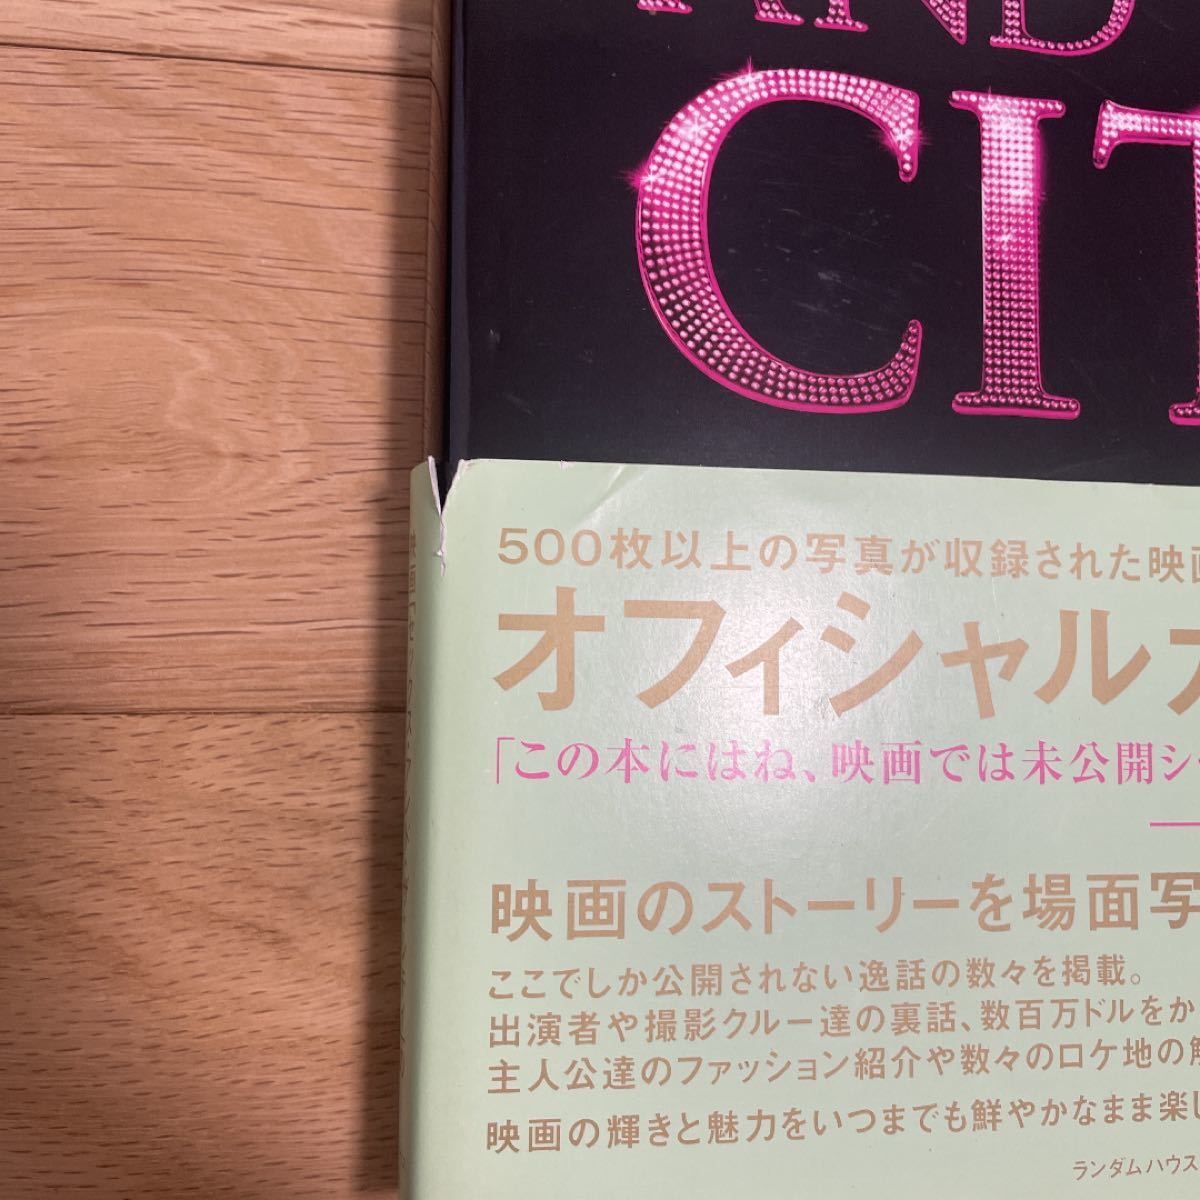 Sex and the city:the movie オフィシャルガイドブック